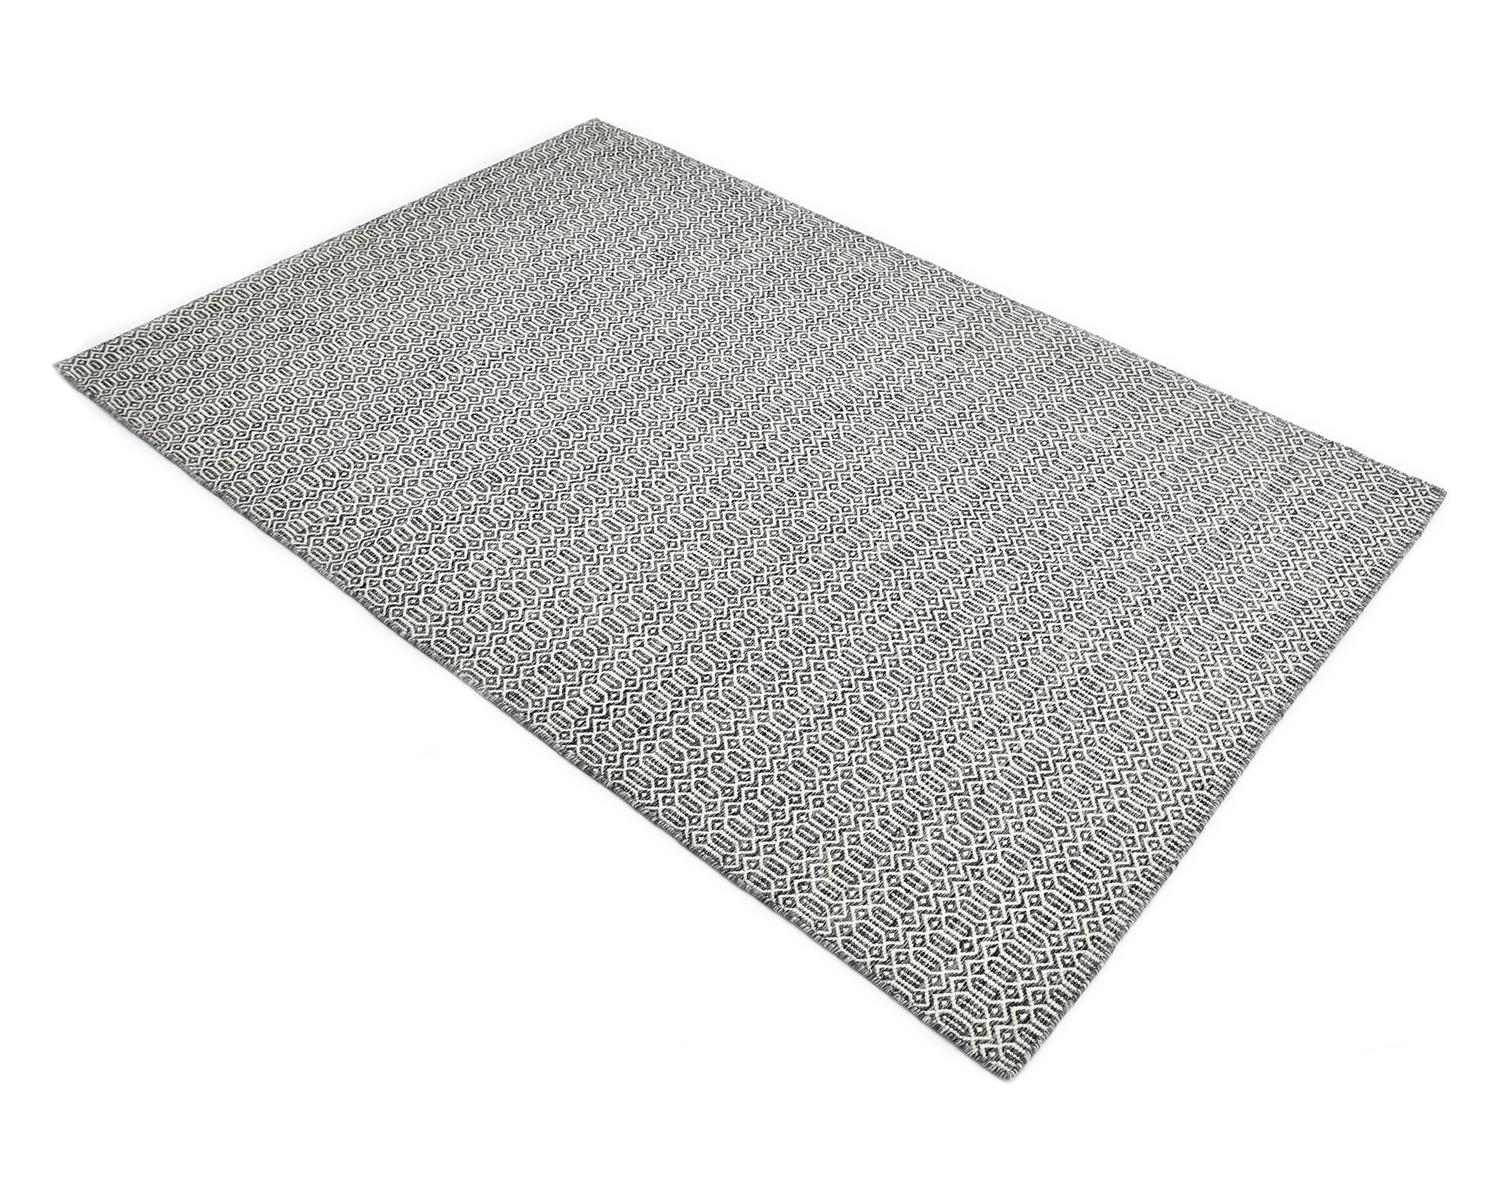 Solo Rugs Flatweave Geometric Hand Woven Gray Area Rug For Sale 1